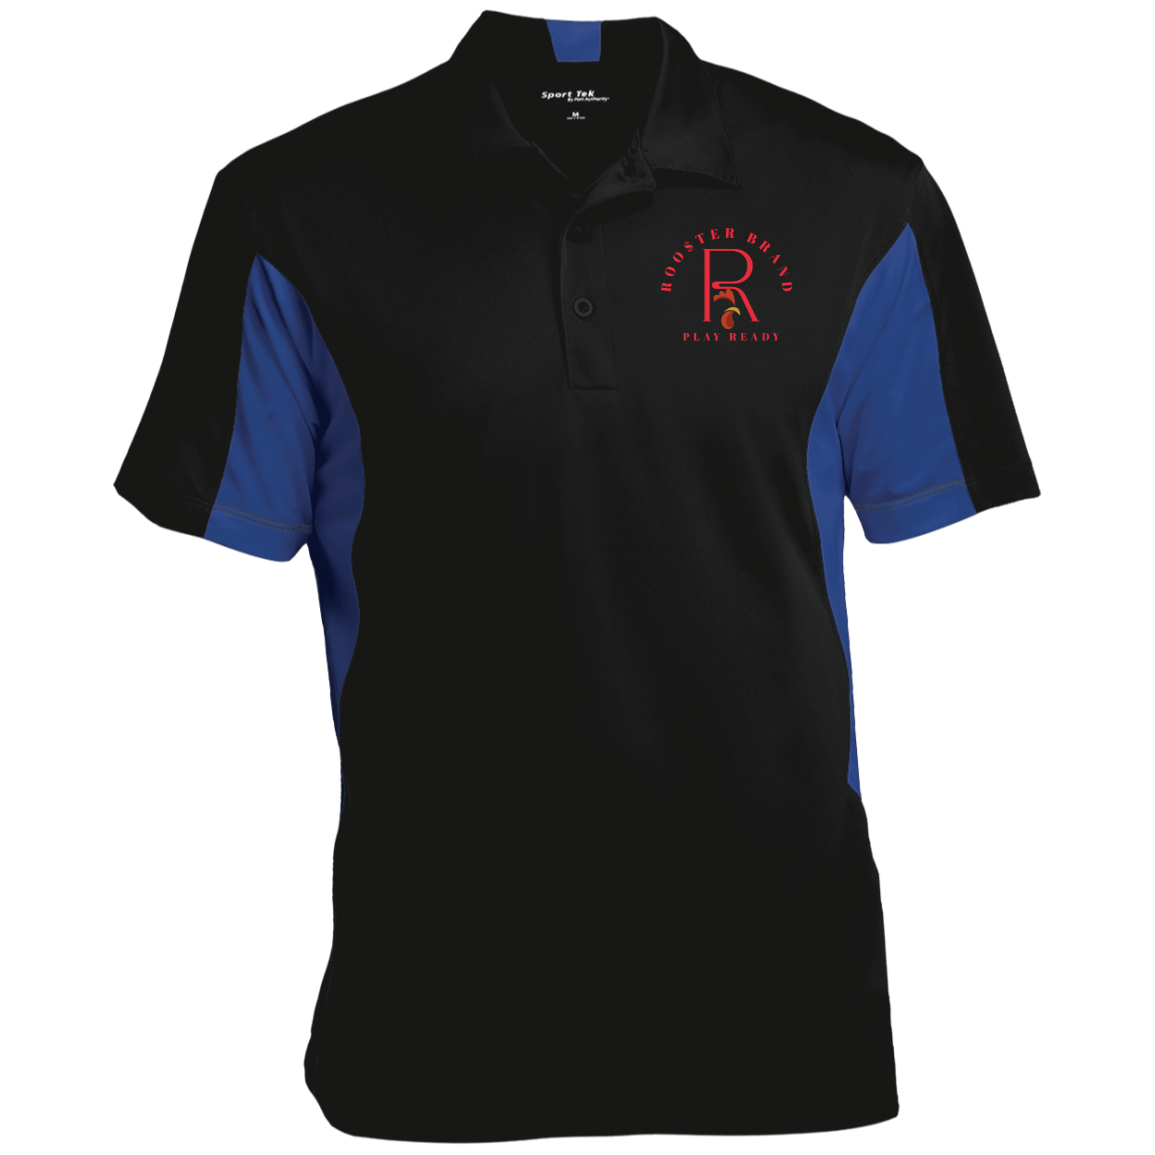 Roo$ter Brand  Men's Colorblock Performance Polo